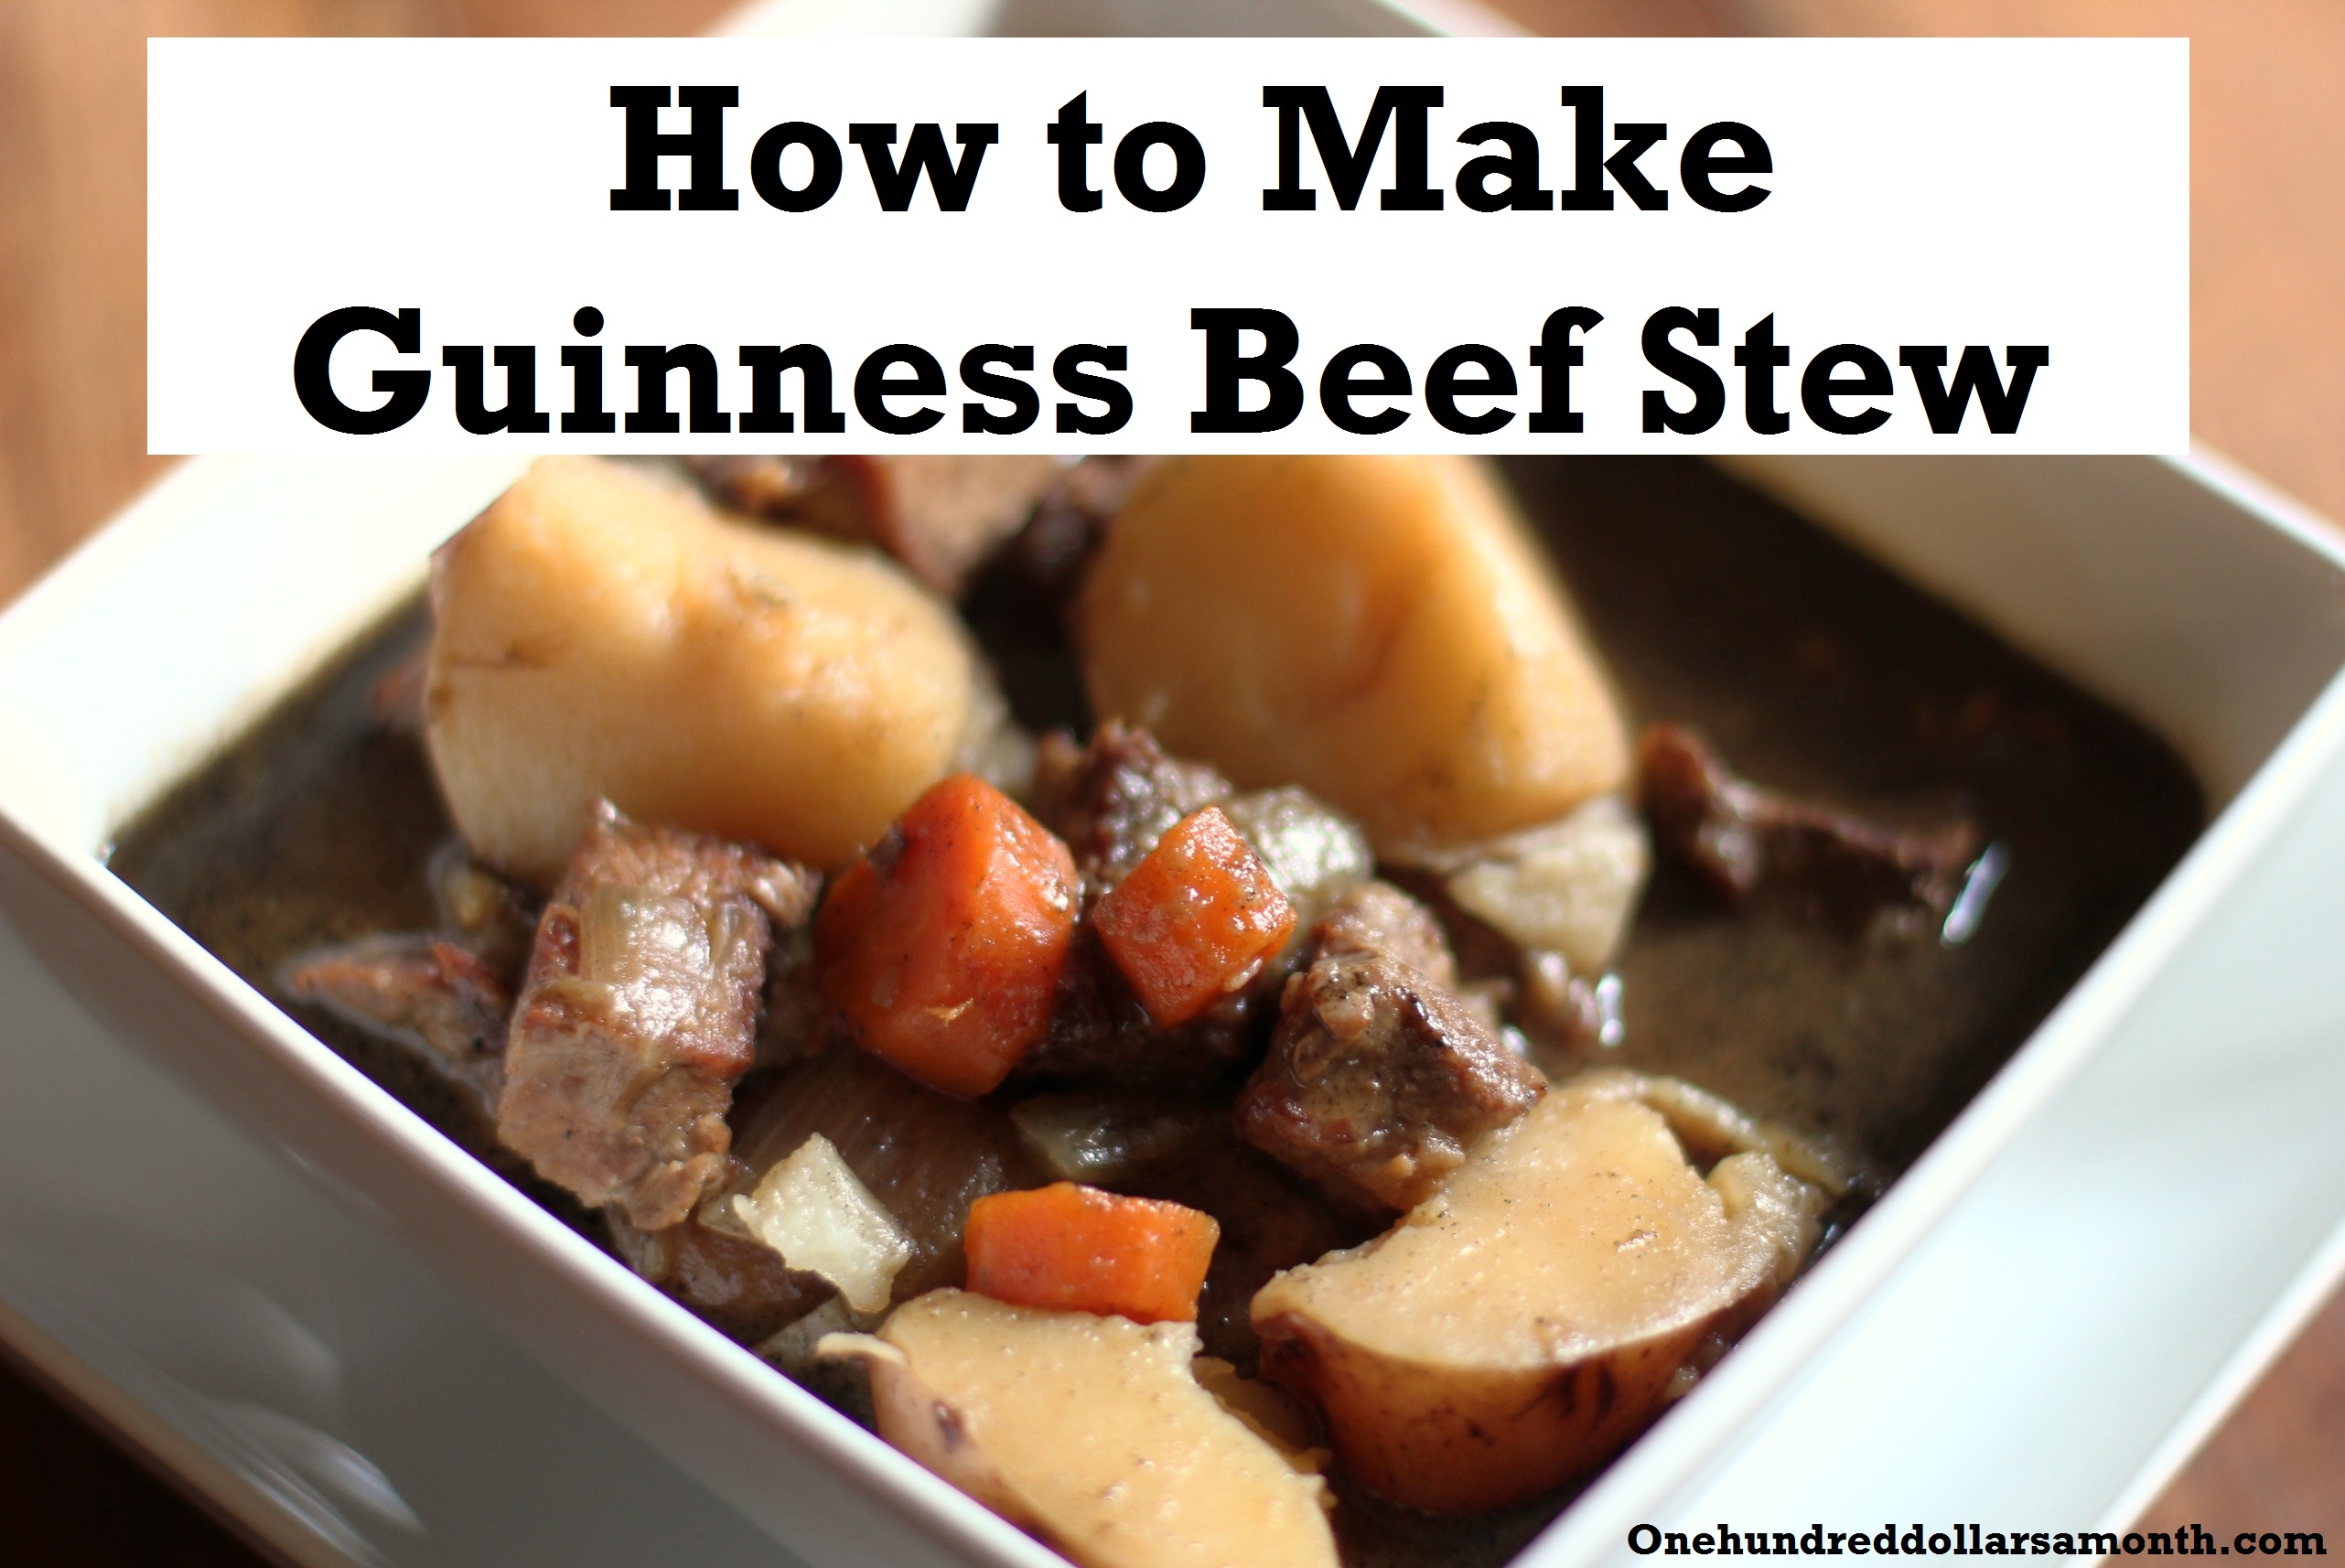 St. Patrick’s Day Recipe: How to Make Guinness Beef Stew